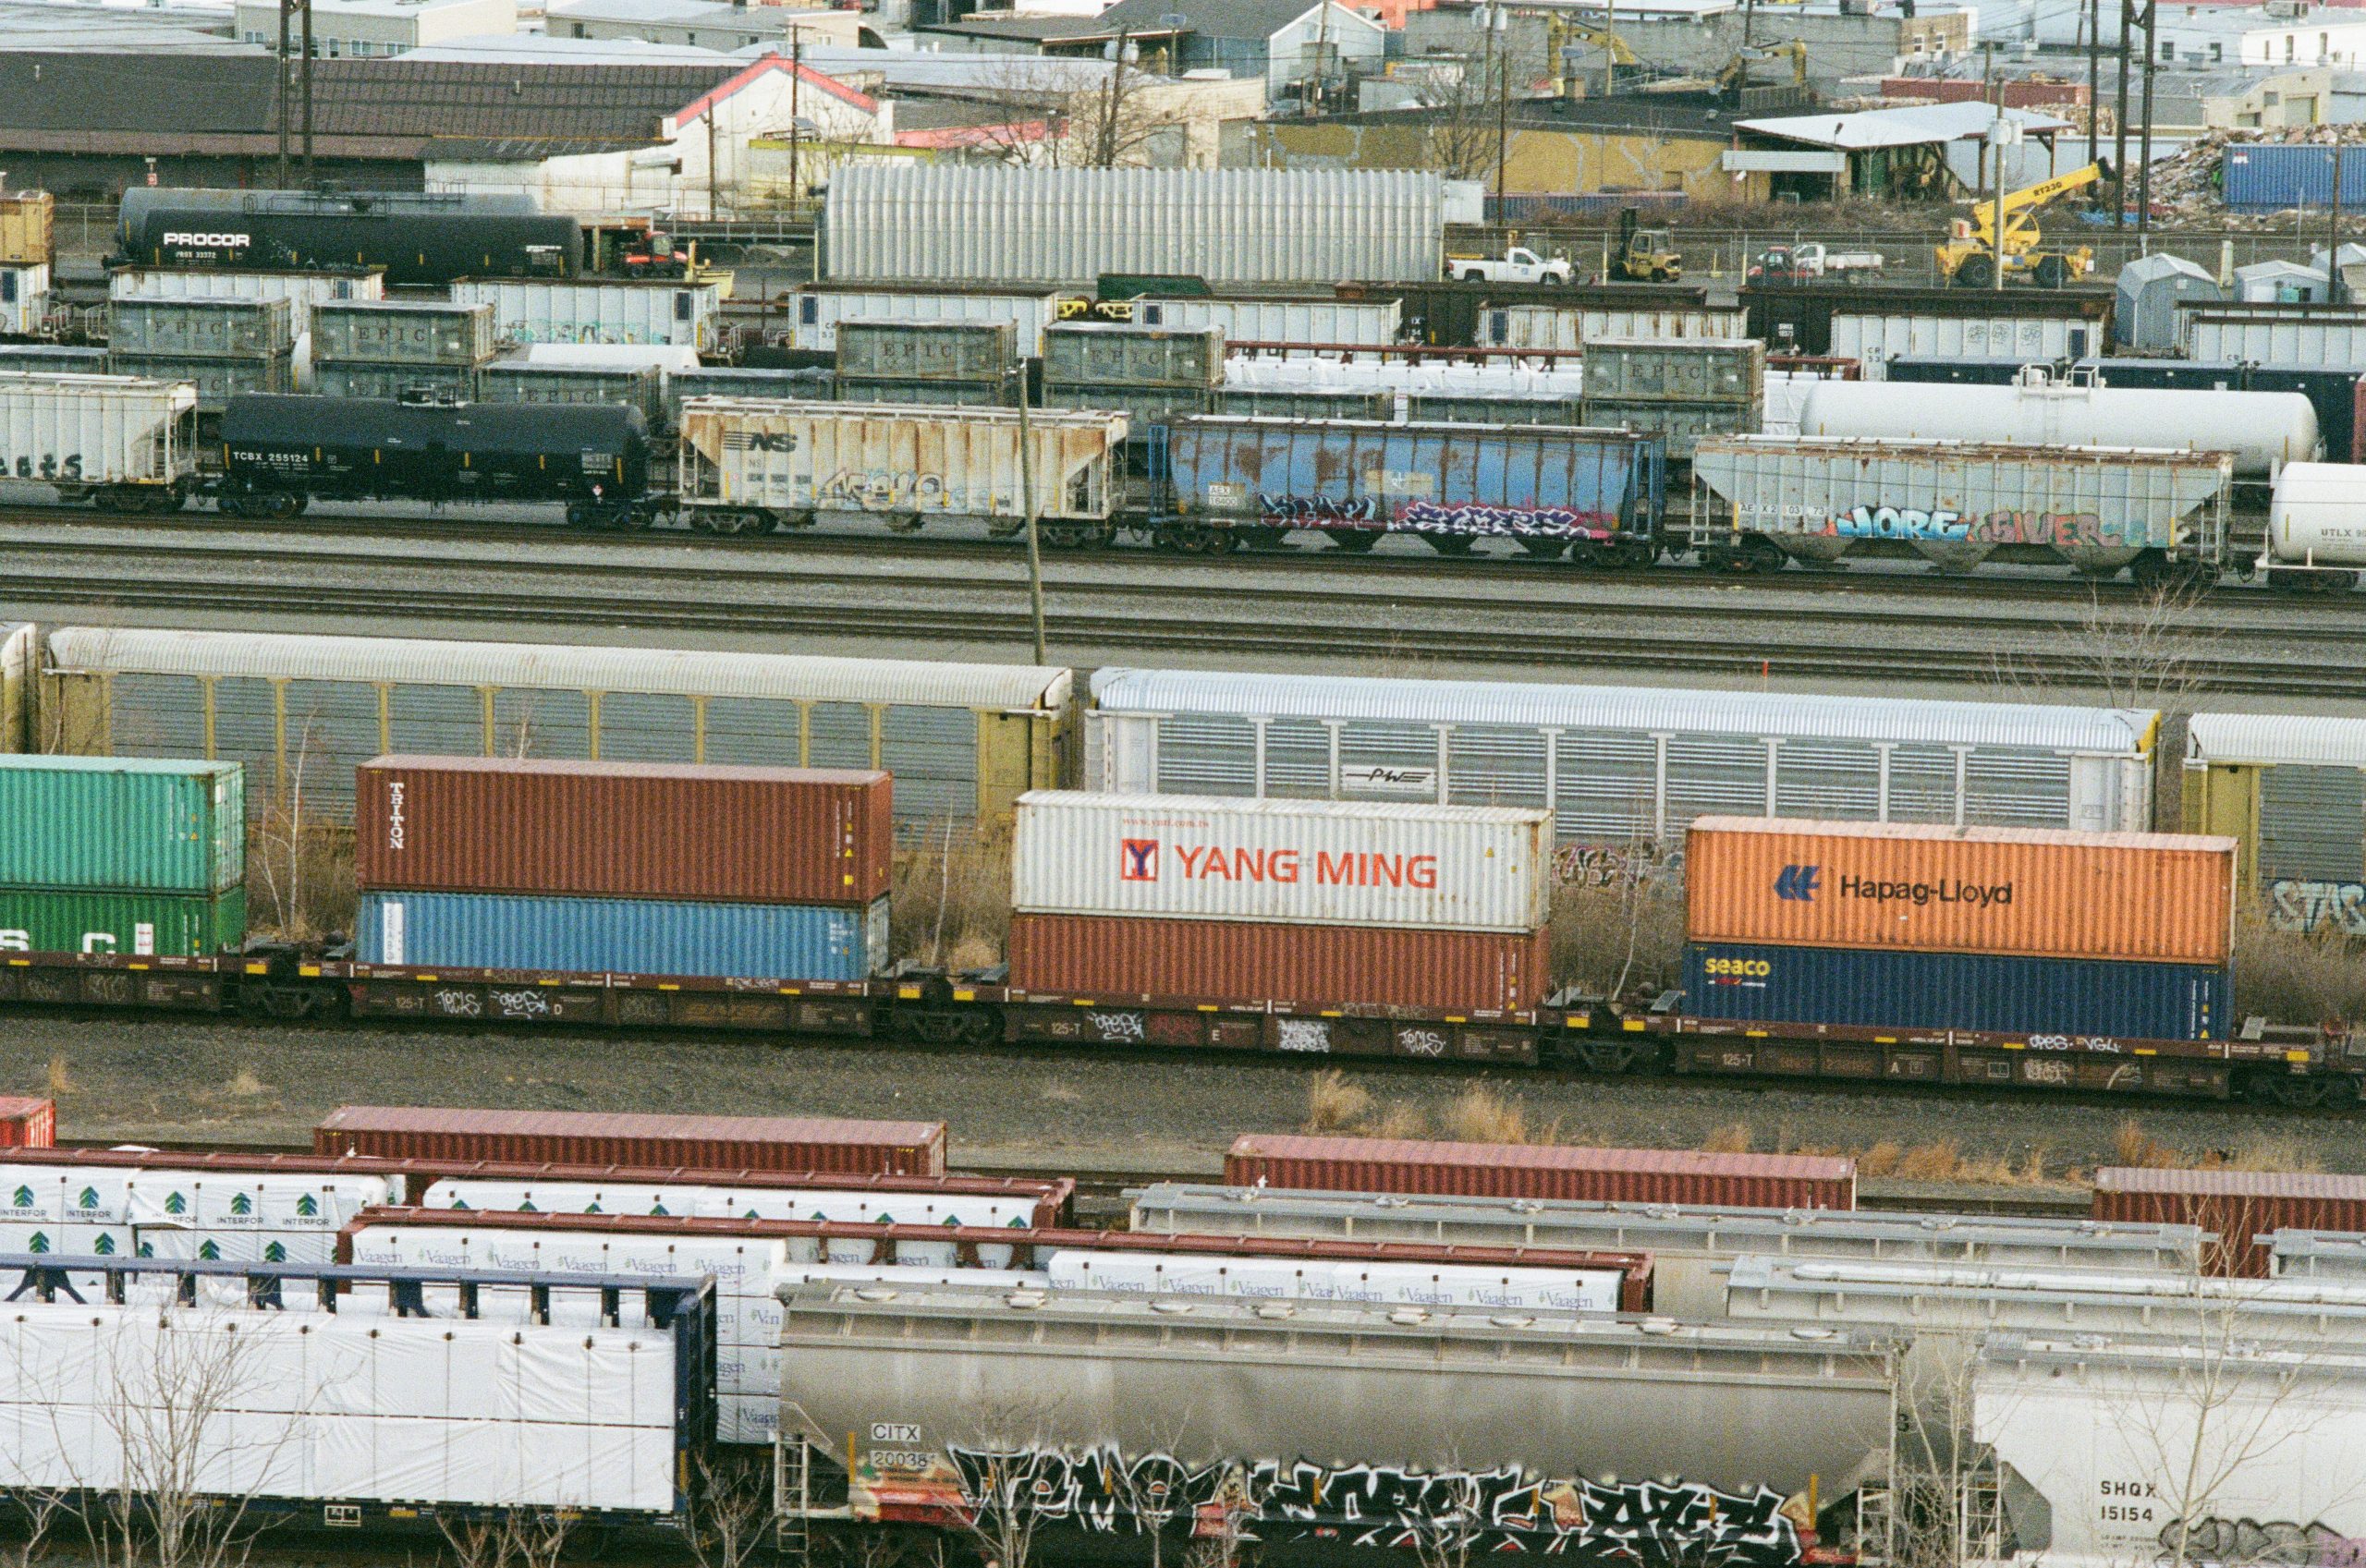 How America Fostered The World’s Best Freight Rail System